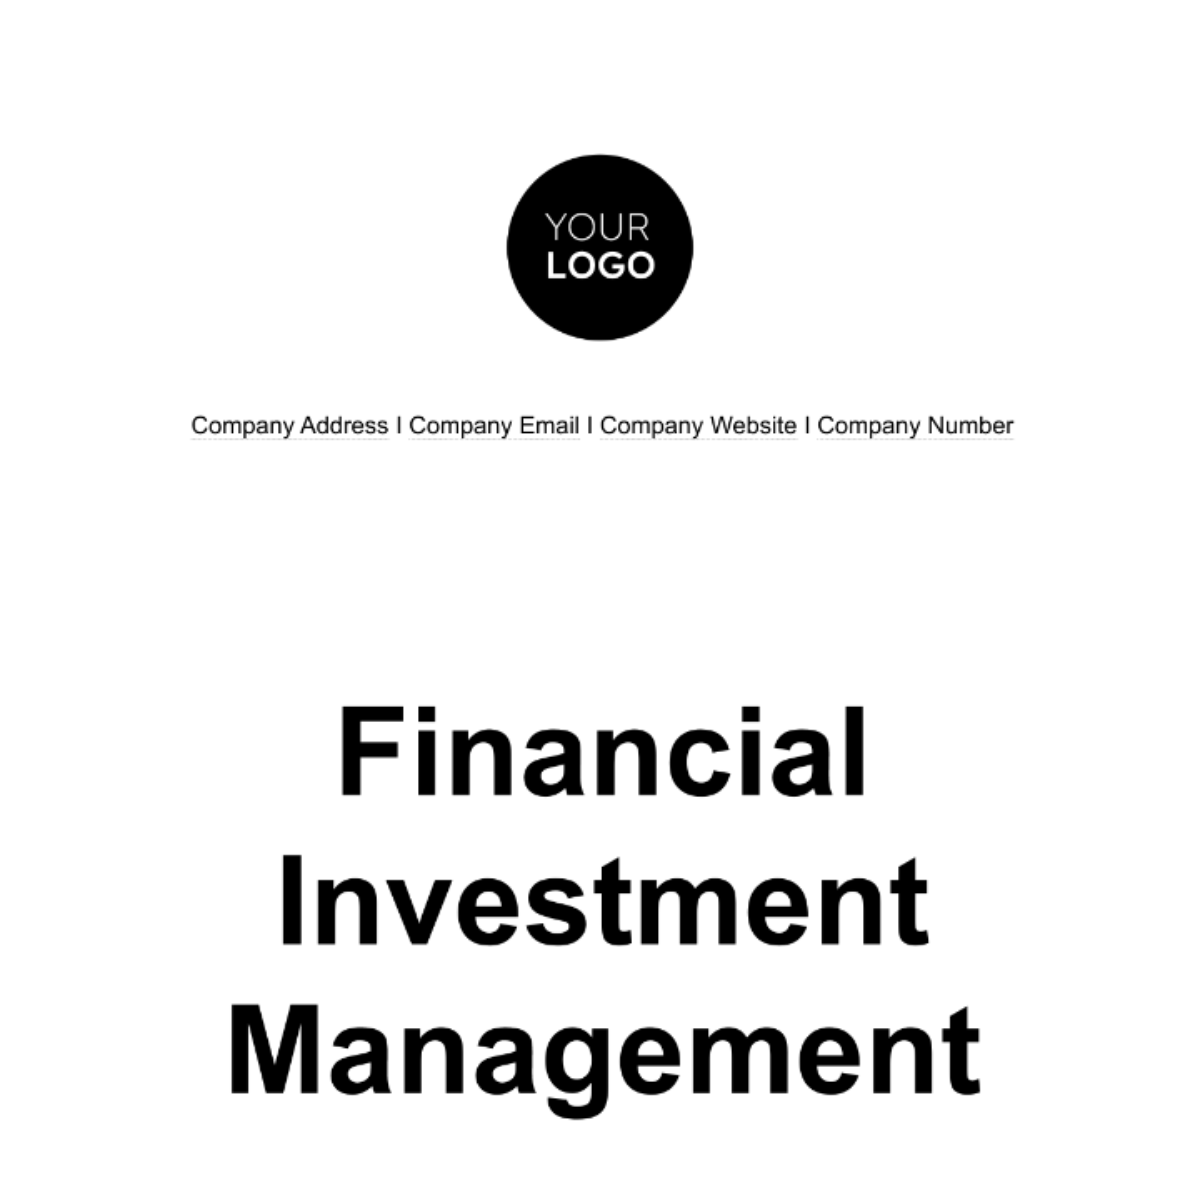 Financial Investment Management Template - Edit Online & Download ...